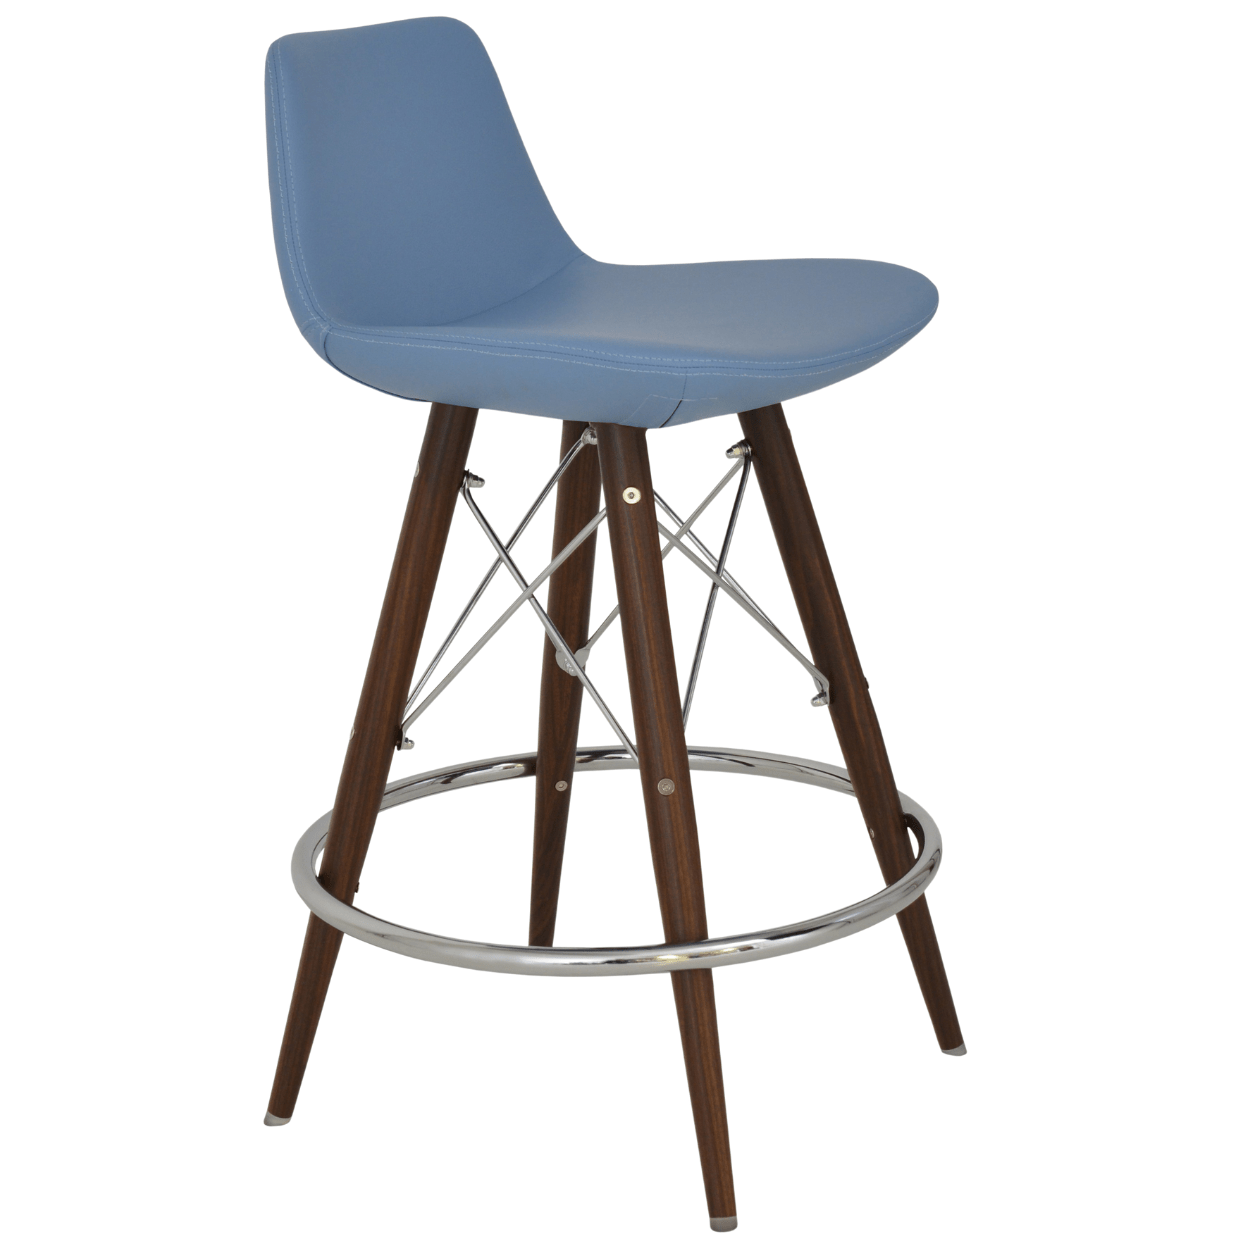 Pera MW Metal and Leather Bar Stools - Your Bar Stools Canada